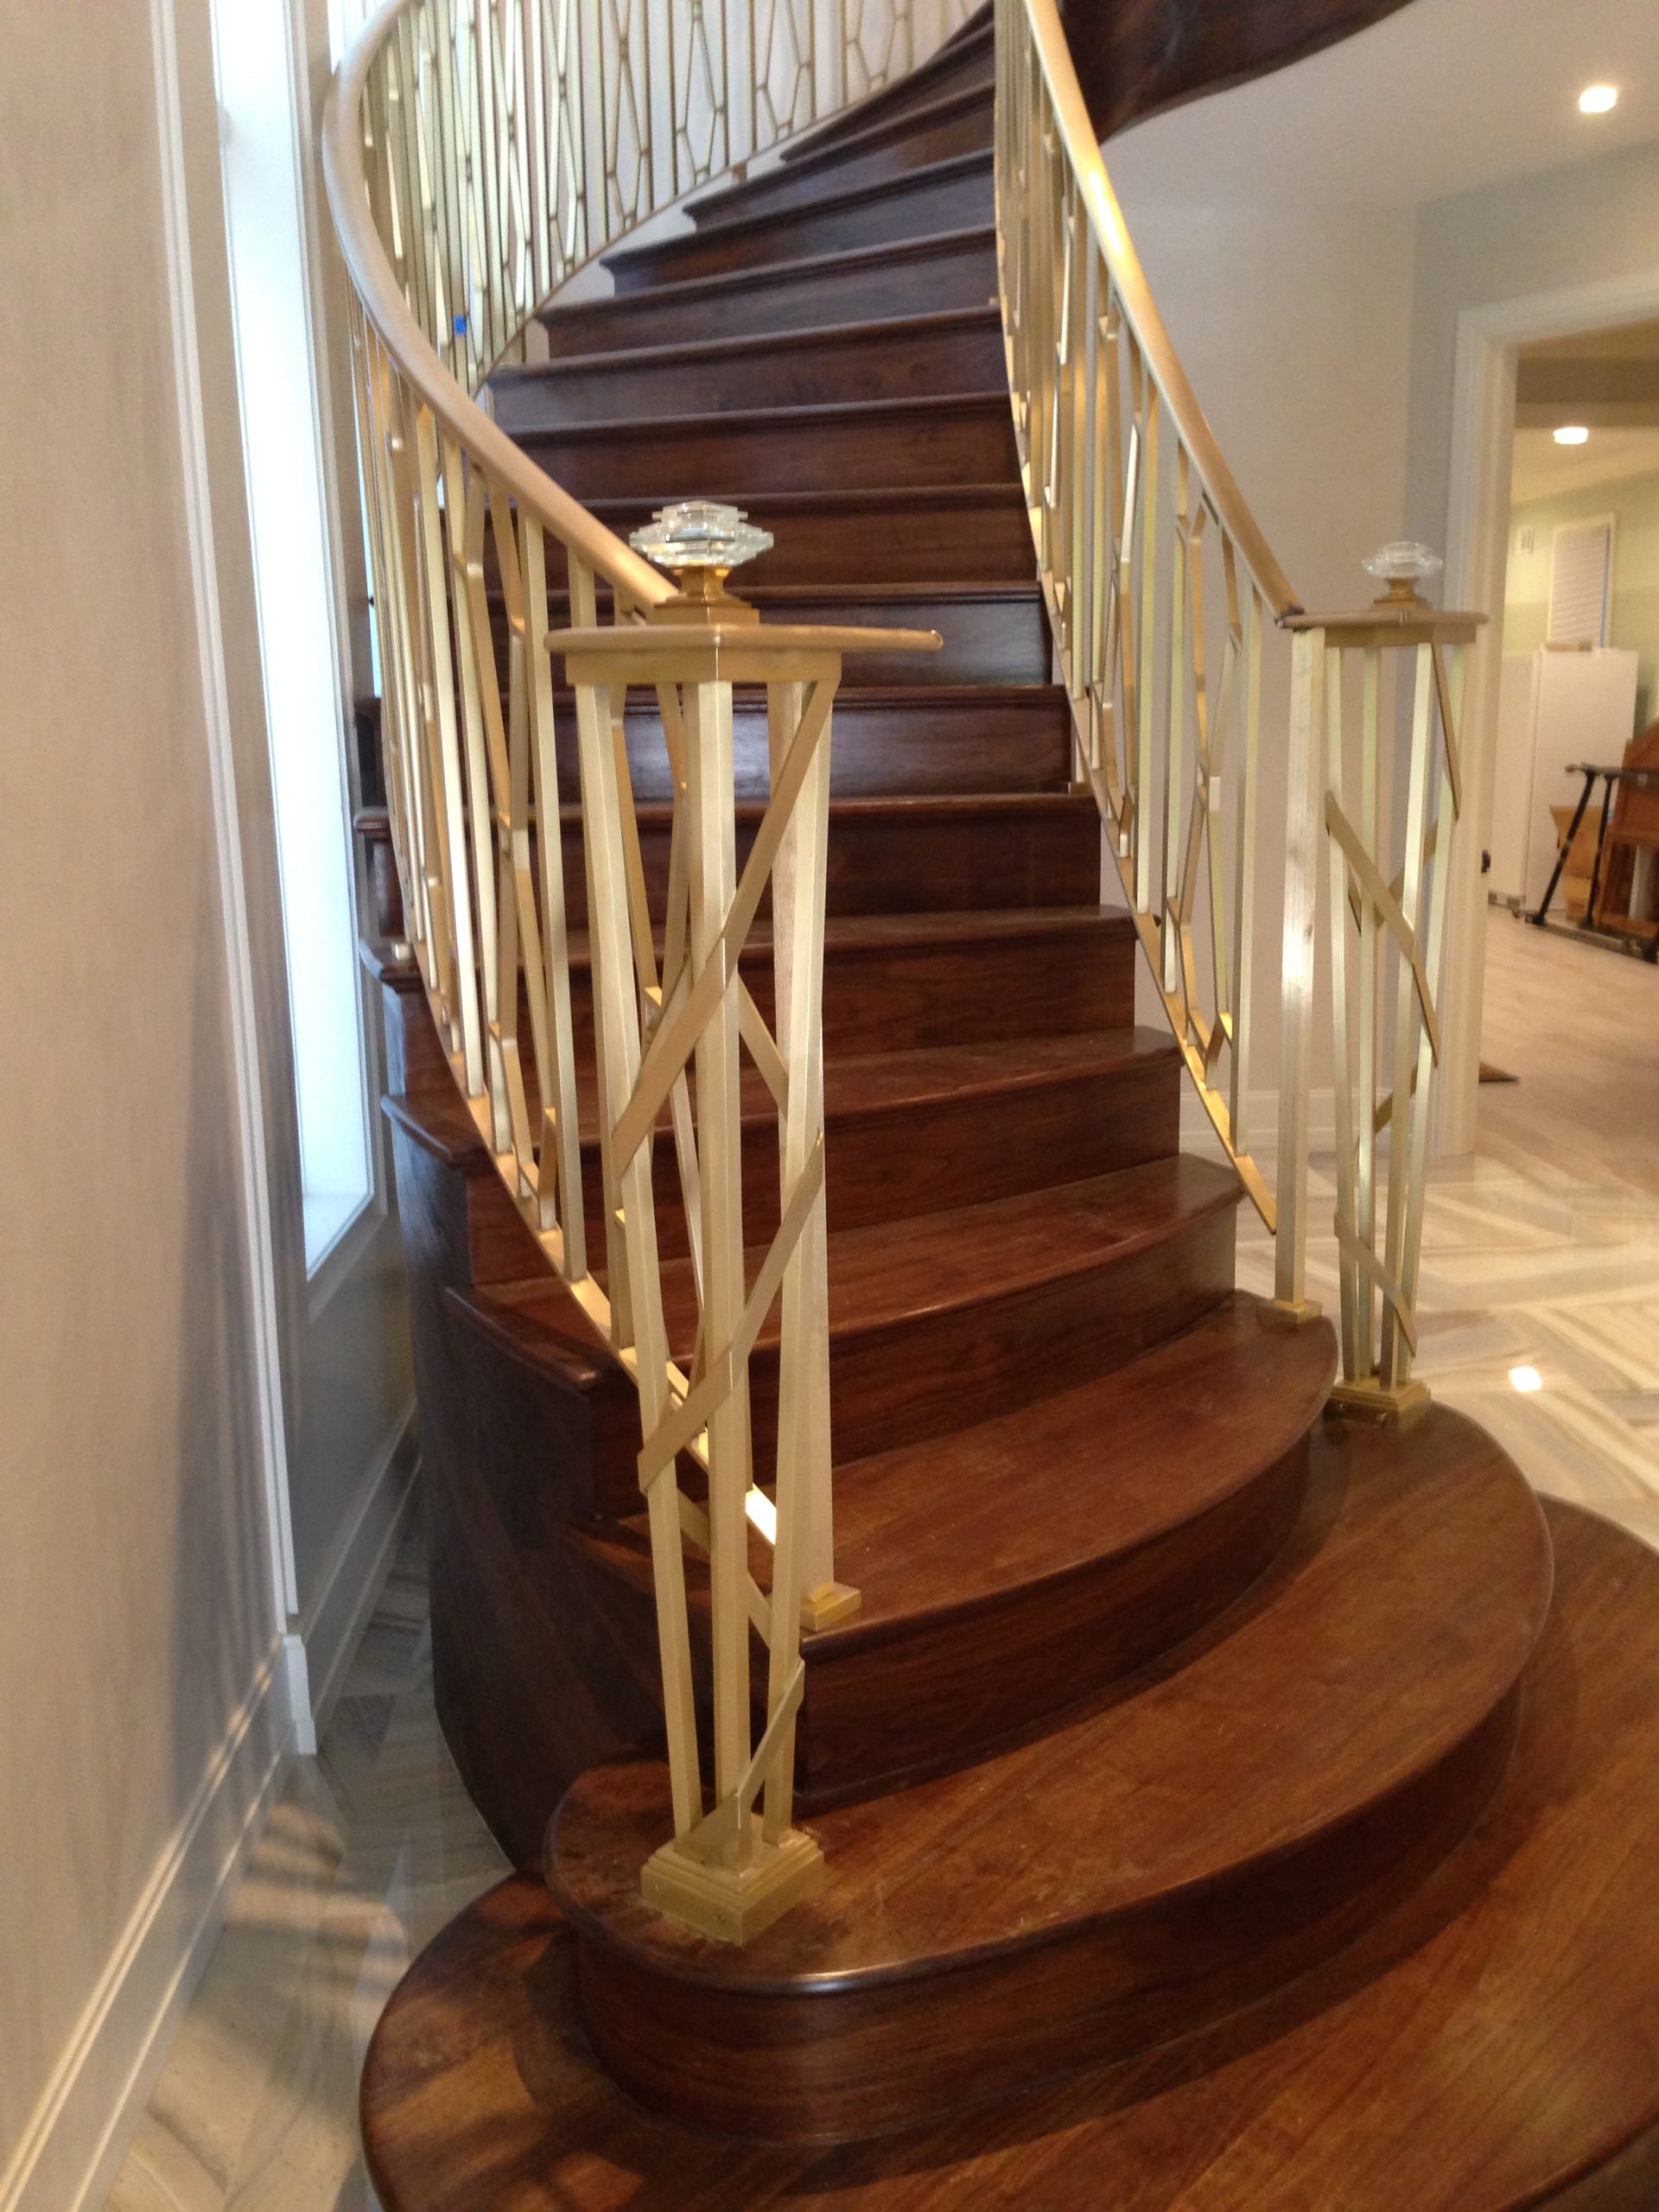 HMH Architectural Metal and Glass - Brass railings for home